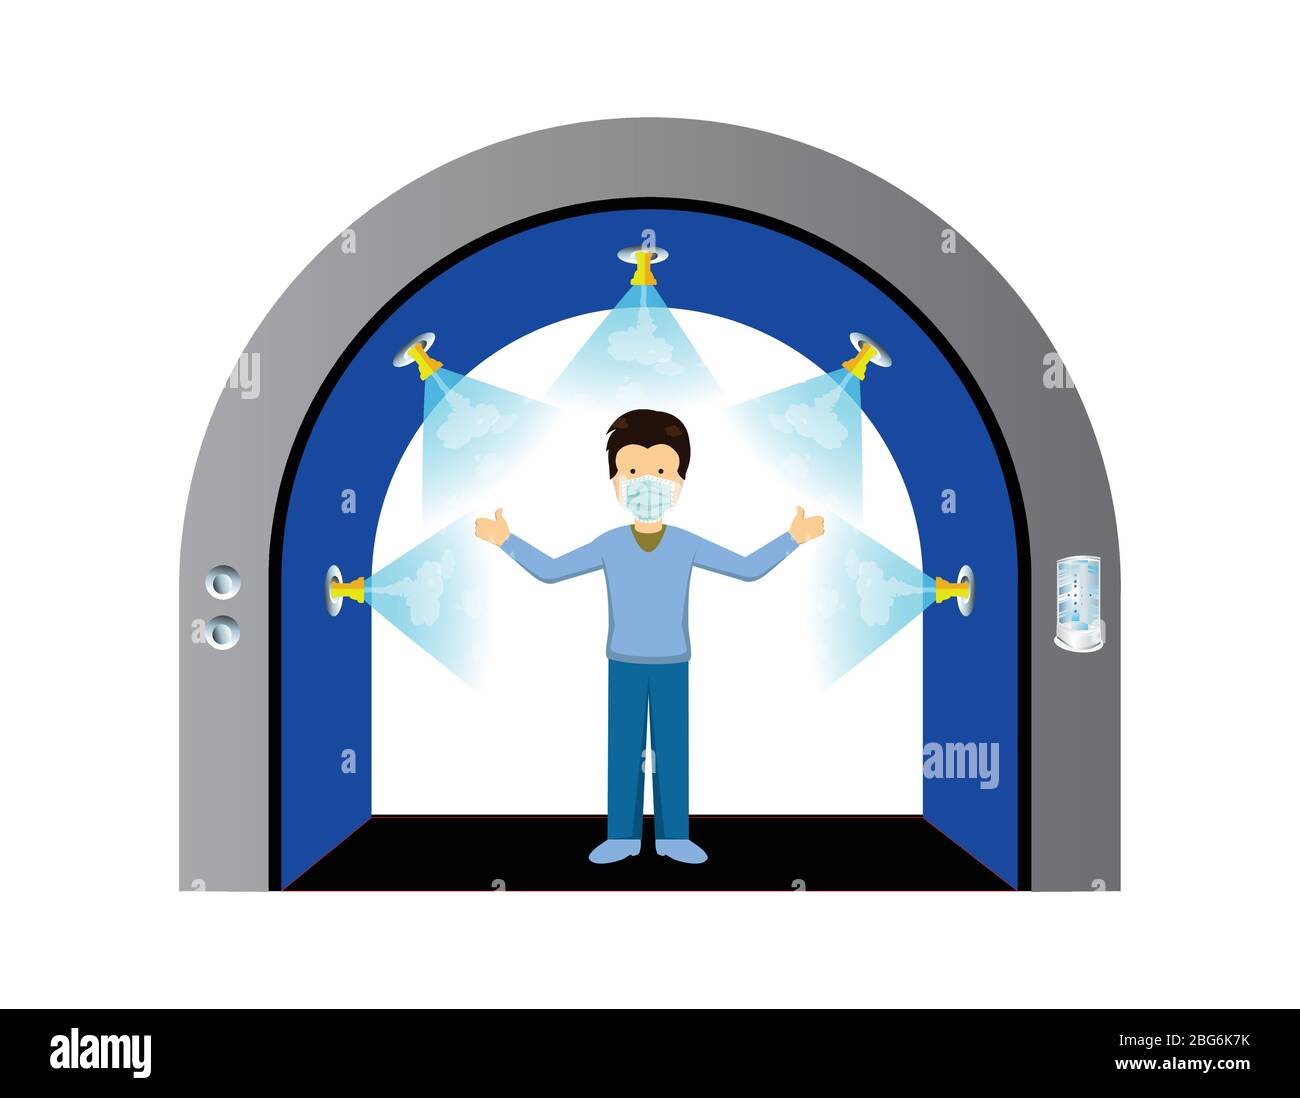 Sanitize tunnel for disinfectant and protect people from covid-19 coronavirus. Tunnel is spraying antibiotic on human body to kill germs and viruses. Stock Vector